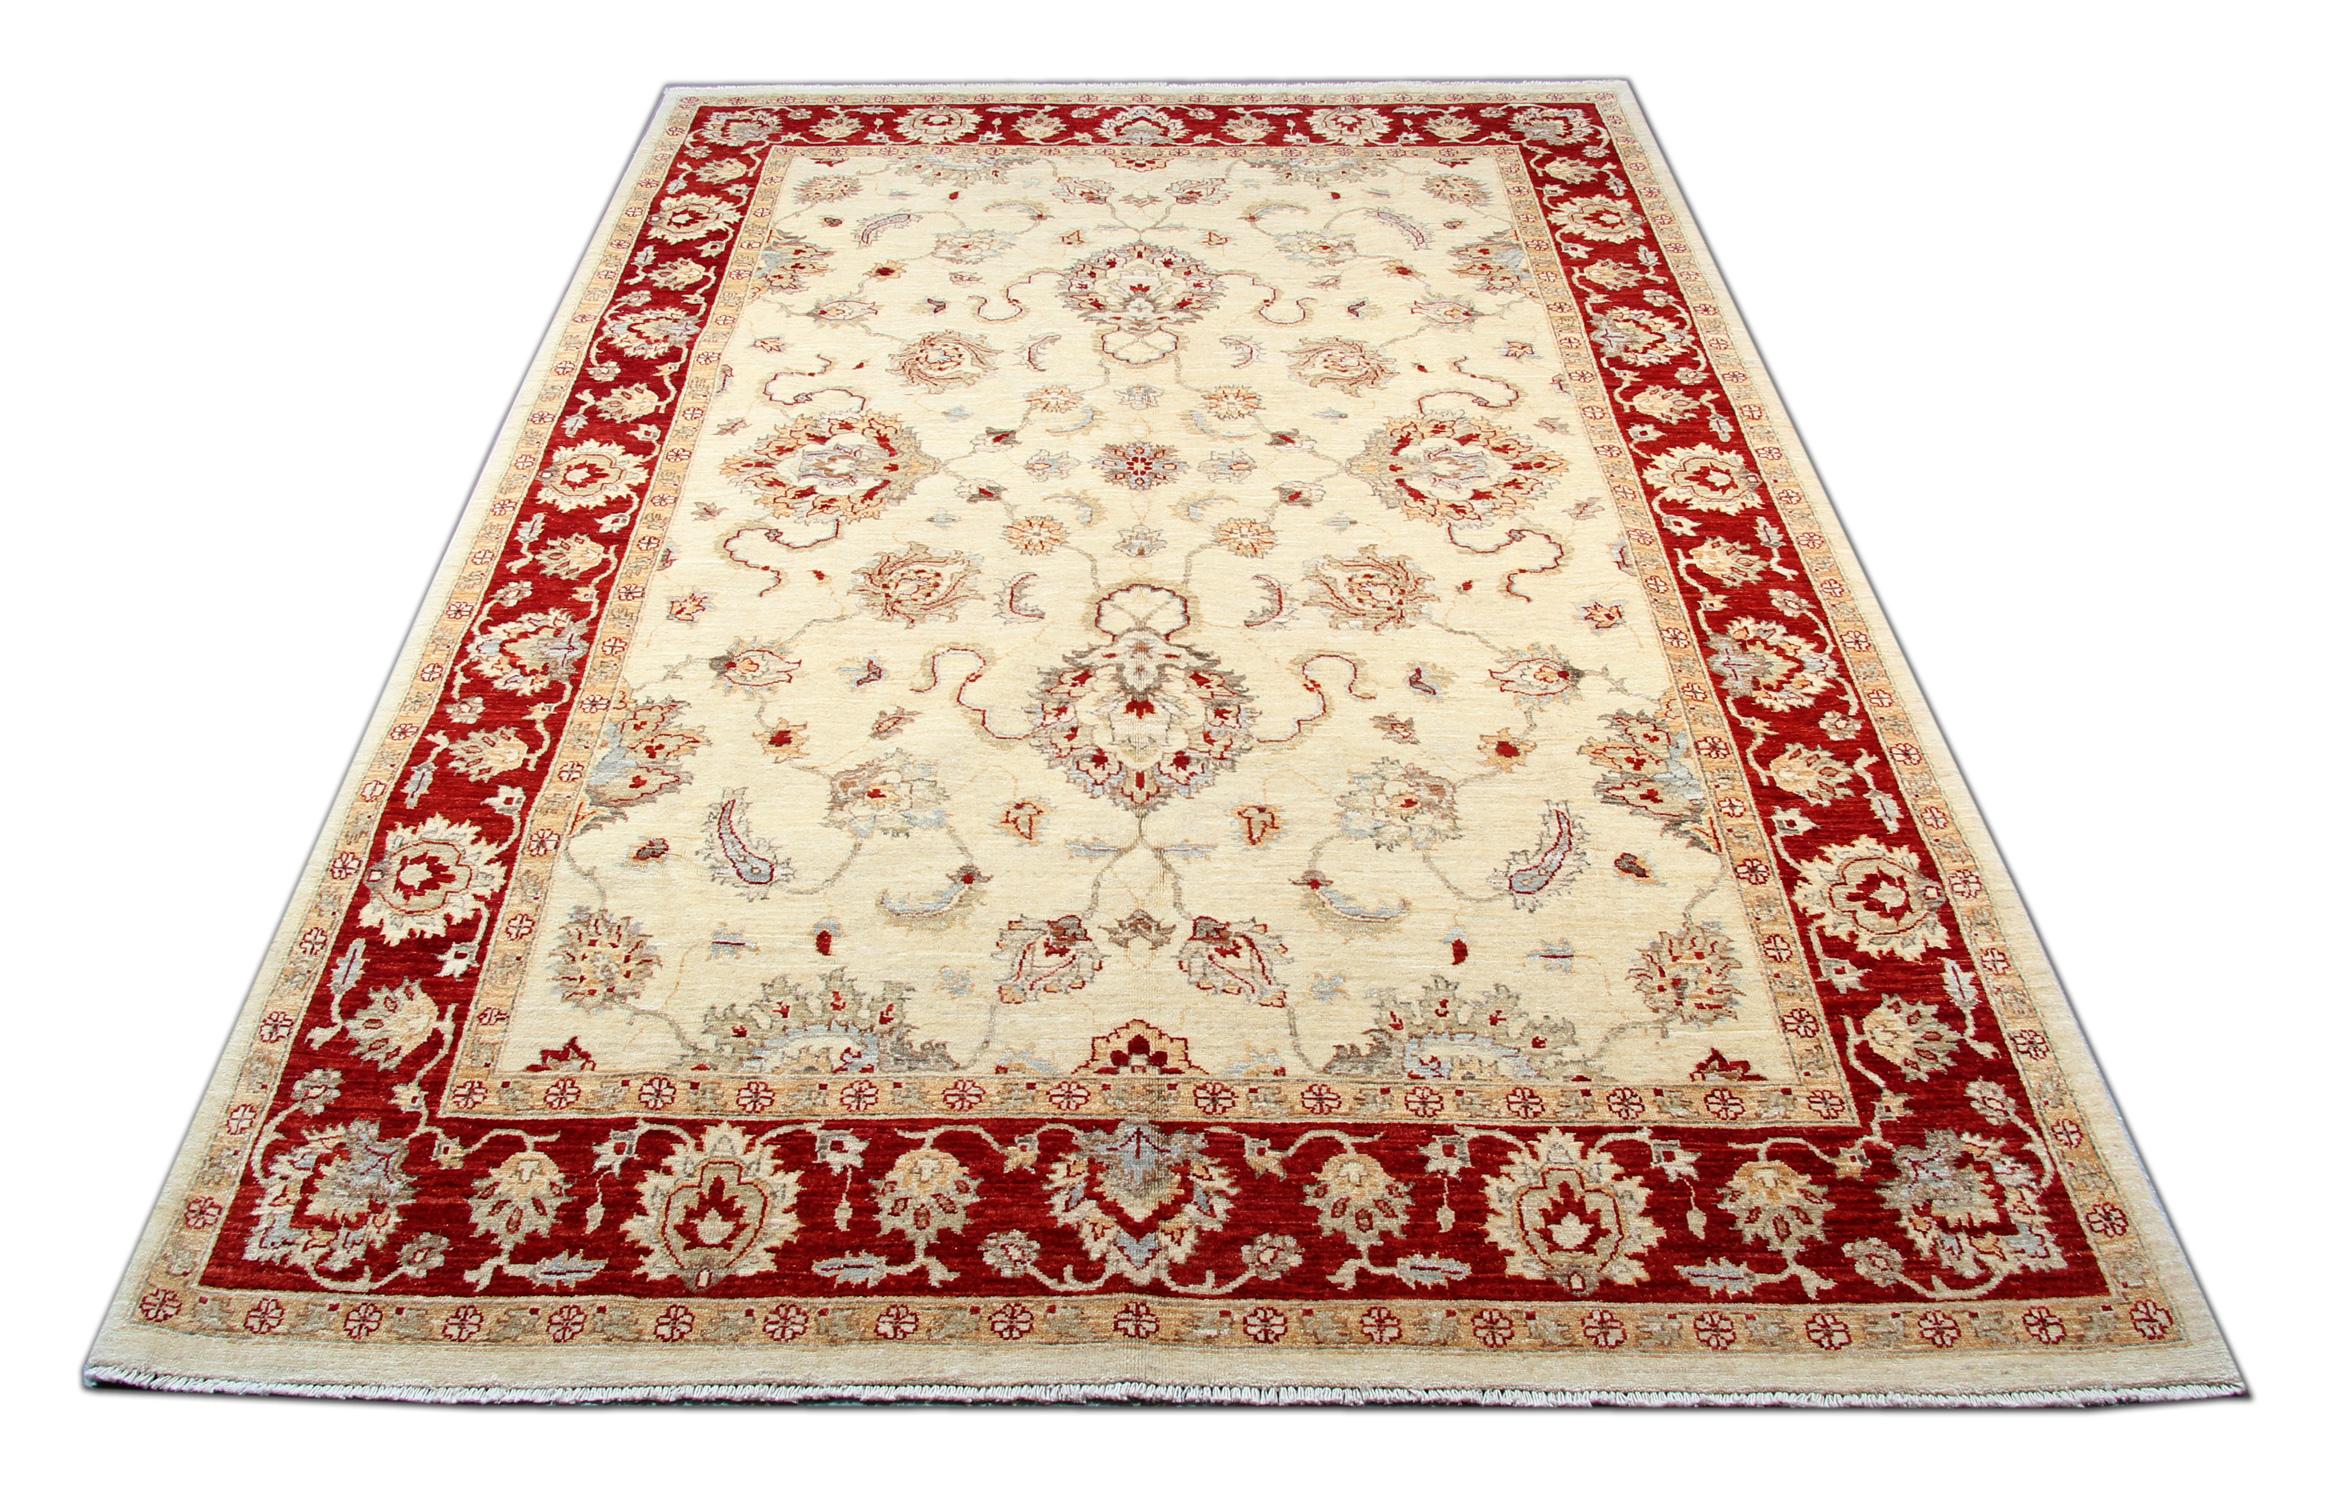 This traditional Ziegler rug is one of our more luxurious rugs made on looms by master weavers of Afghan rugs. This cream rug is made with or all handspun wool, with the color coming from organic vegetable dyes. This carpet features an all-over